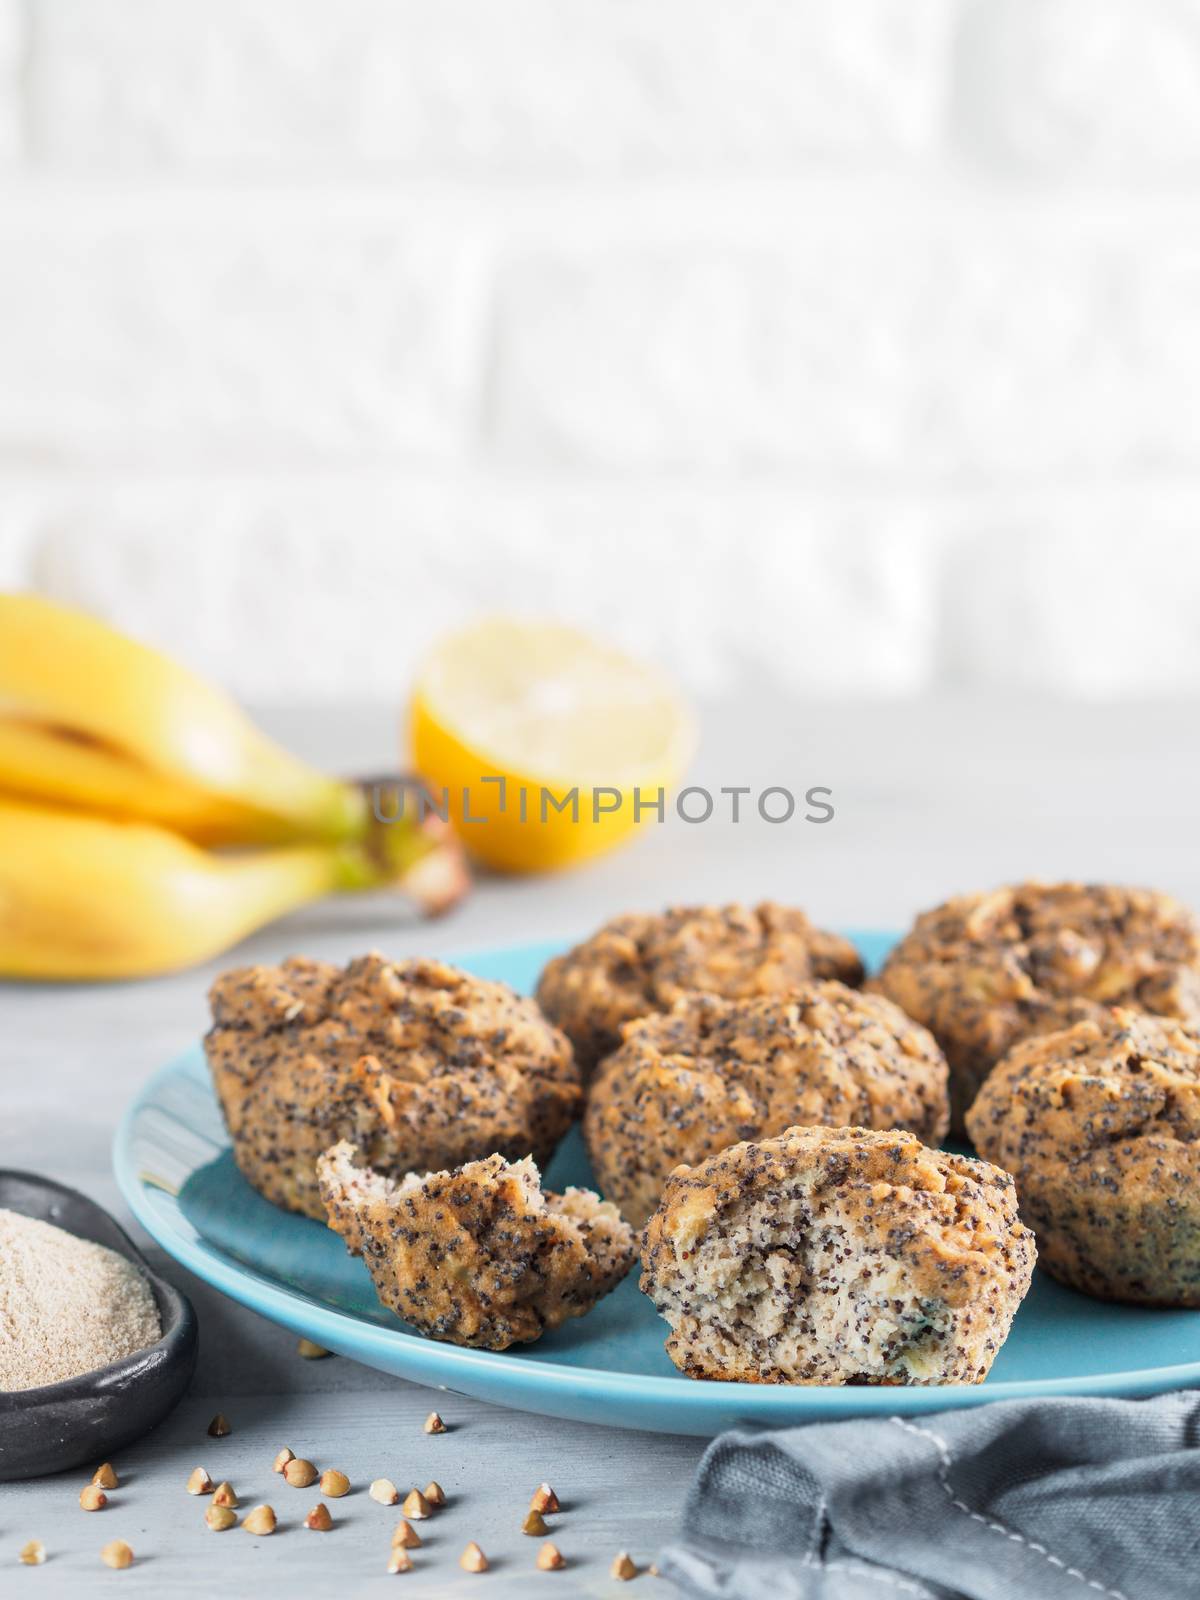 Close-up view of healthy gluten-free homemmade banana muffins with buckwheat flour. Vegan muffins with poppy seeds on blue plate over gray wooden table. Copy space